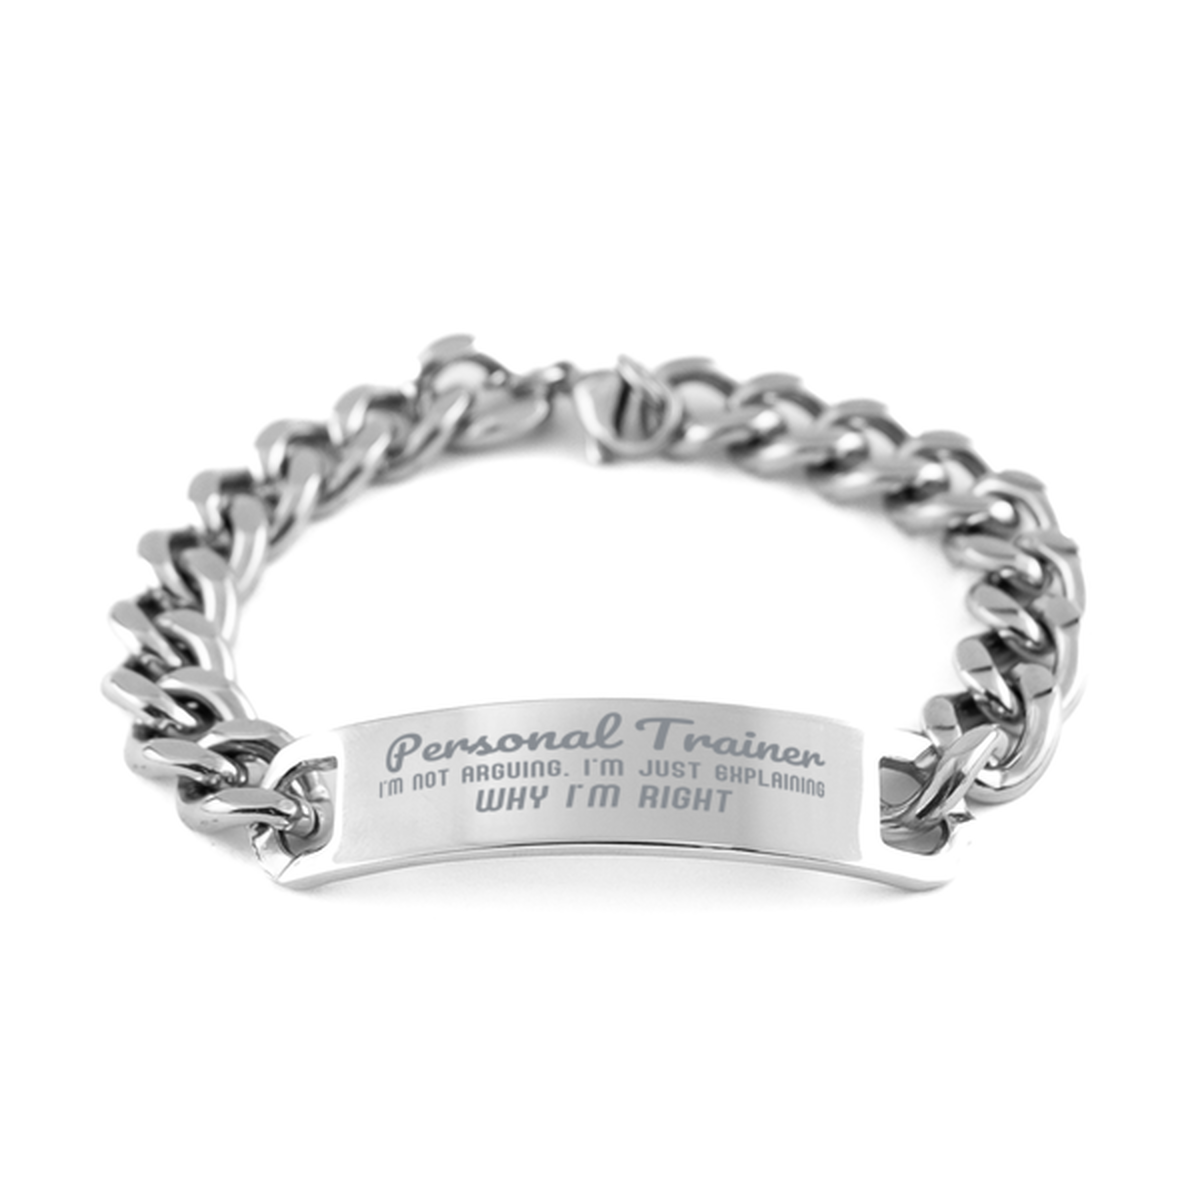 Personal Trainer I'm not Arguing. I'm Just Explaining Why I'm RIGHT Cuban Chain Stainless Steel Bracelet, Graduation Birthday Christmas Personal Trainer Gifts For Personal Trainer Funny Saying Quote Present for Men Women Coworker